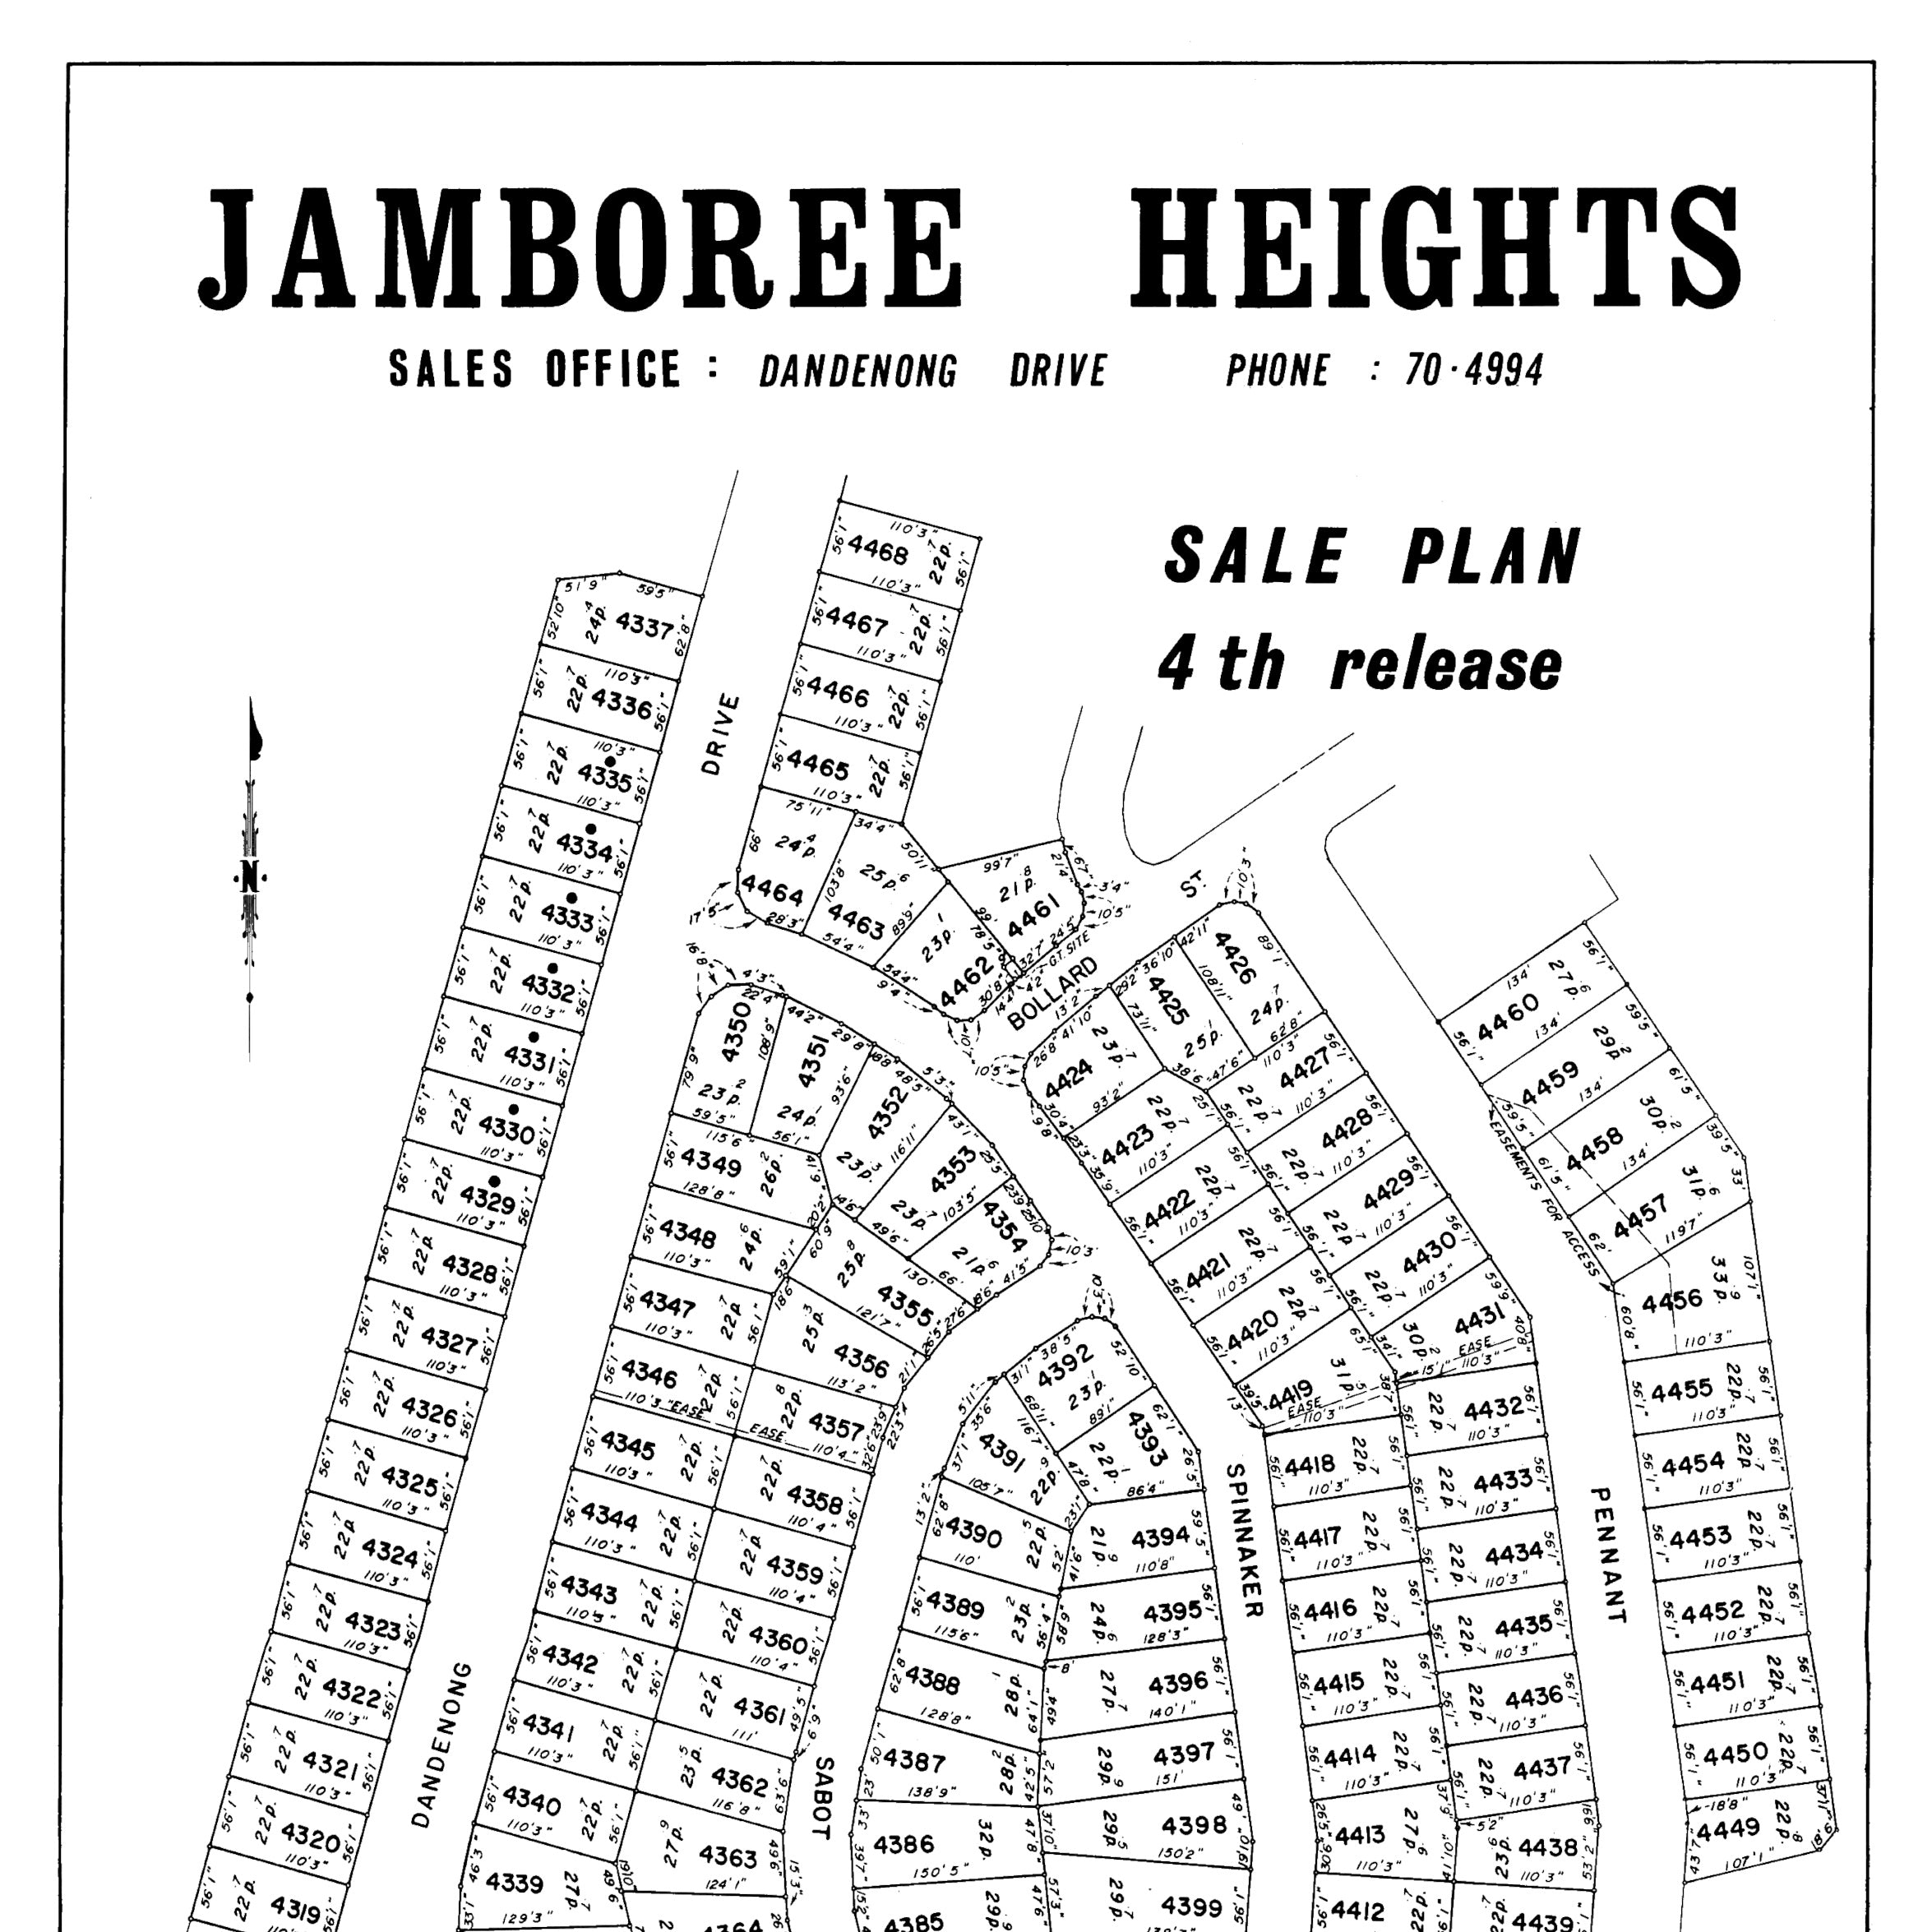 1971 Jamboree Heights - 4th Release